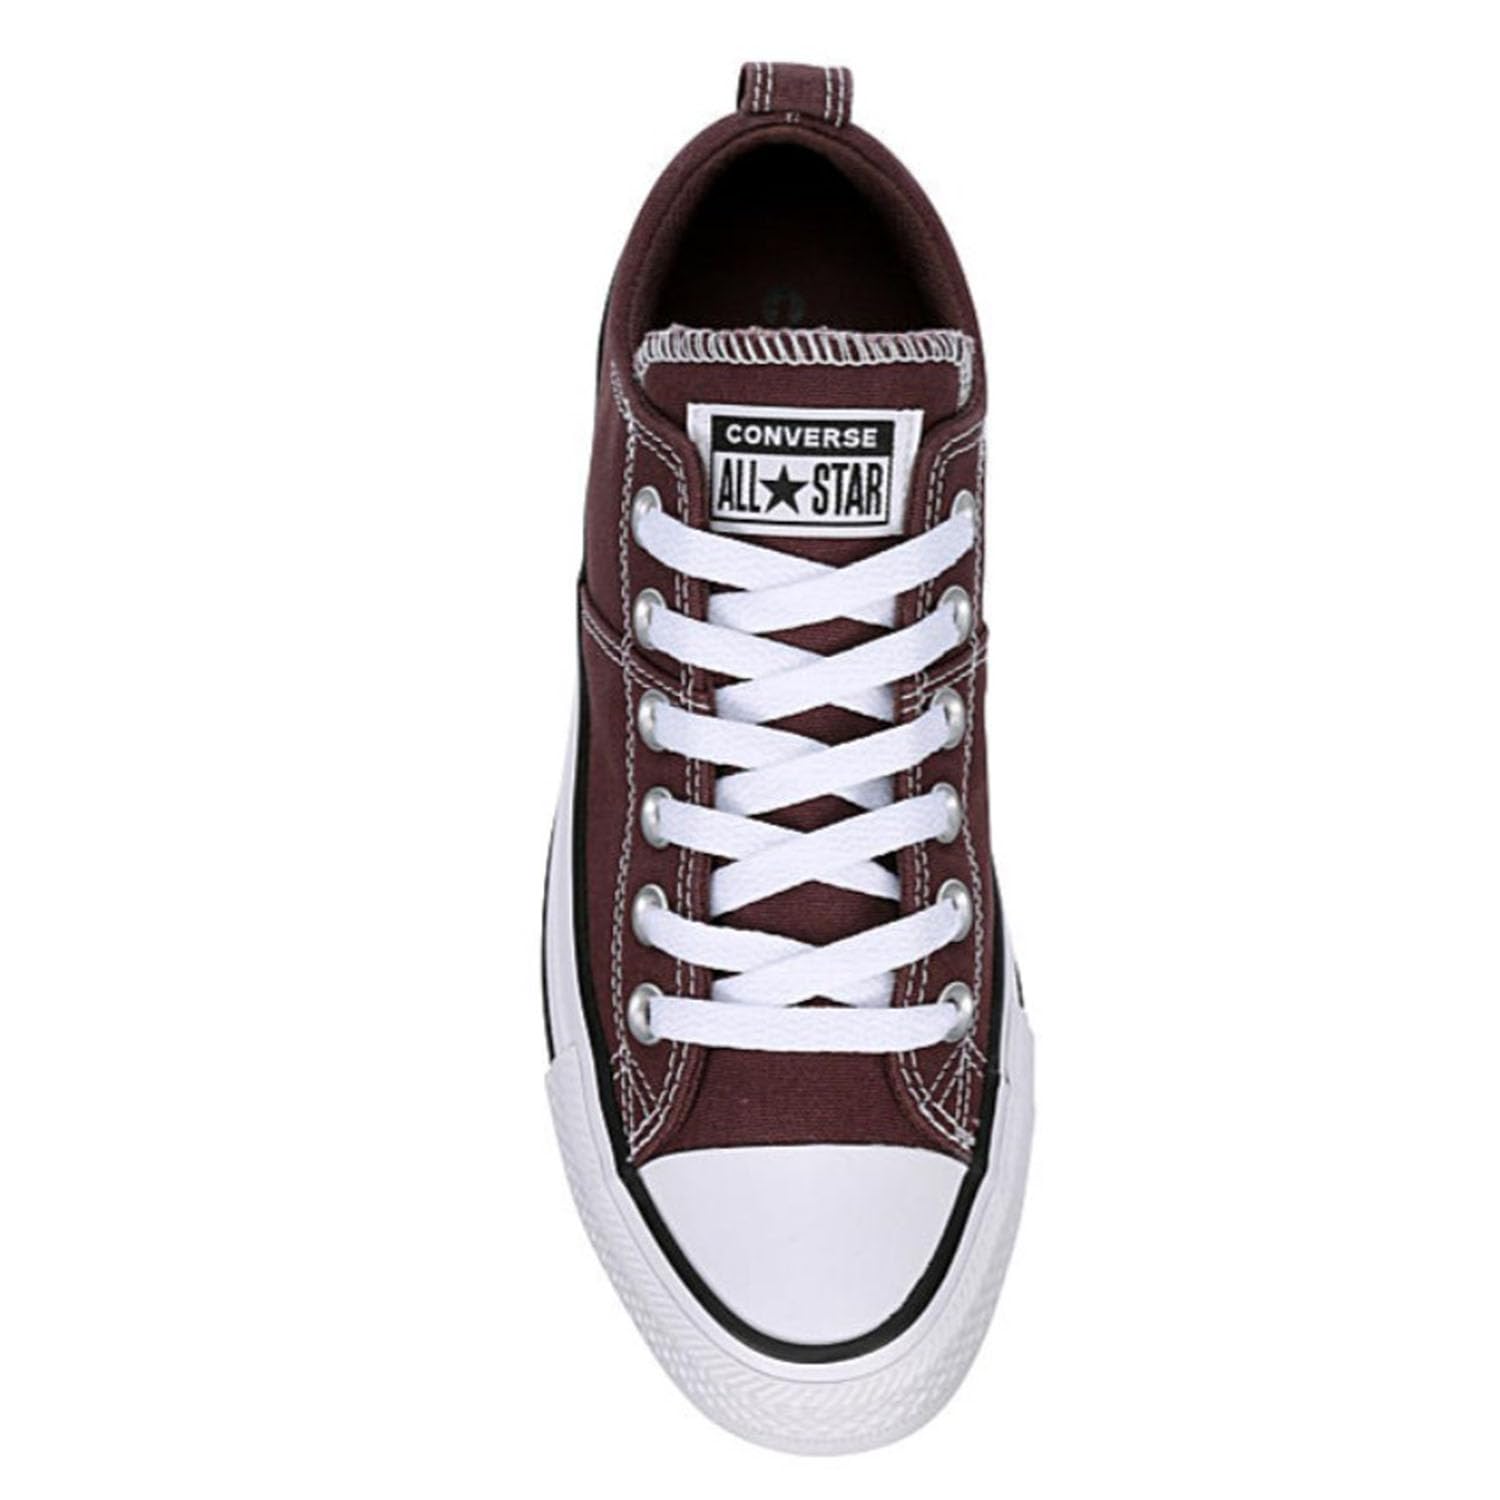 Converse Unisex Chuck Taylor All Star Low - Lace Up Style Sneaker - Madison Ox - Eternal Earthe/White/Black 8